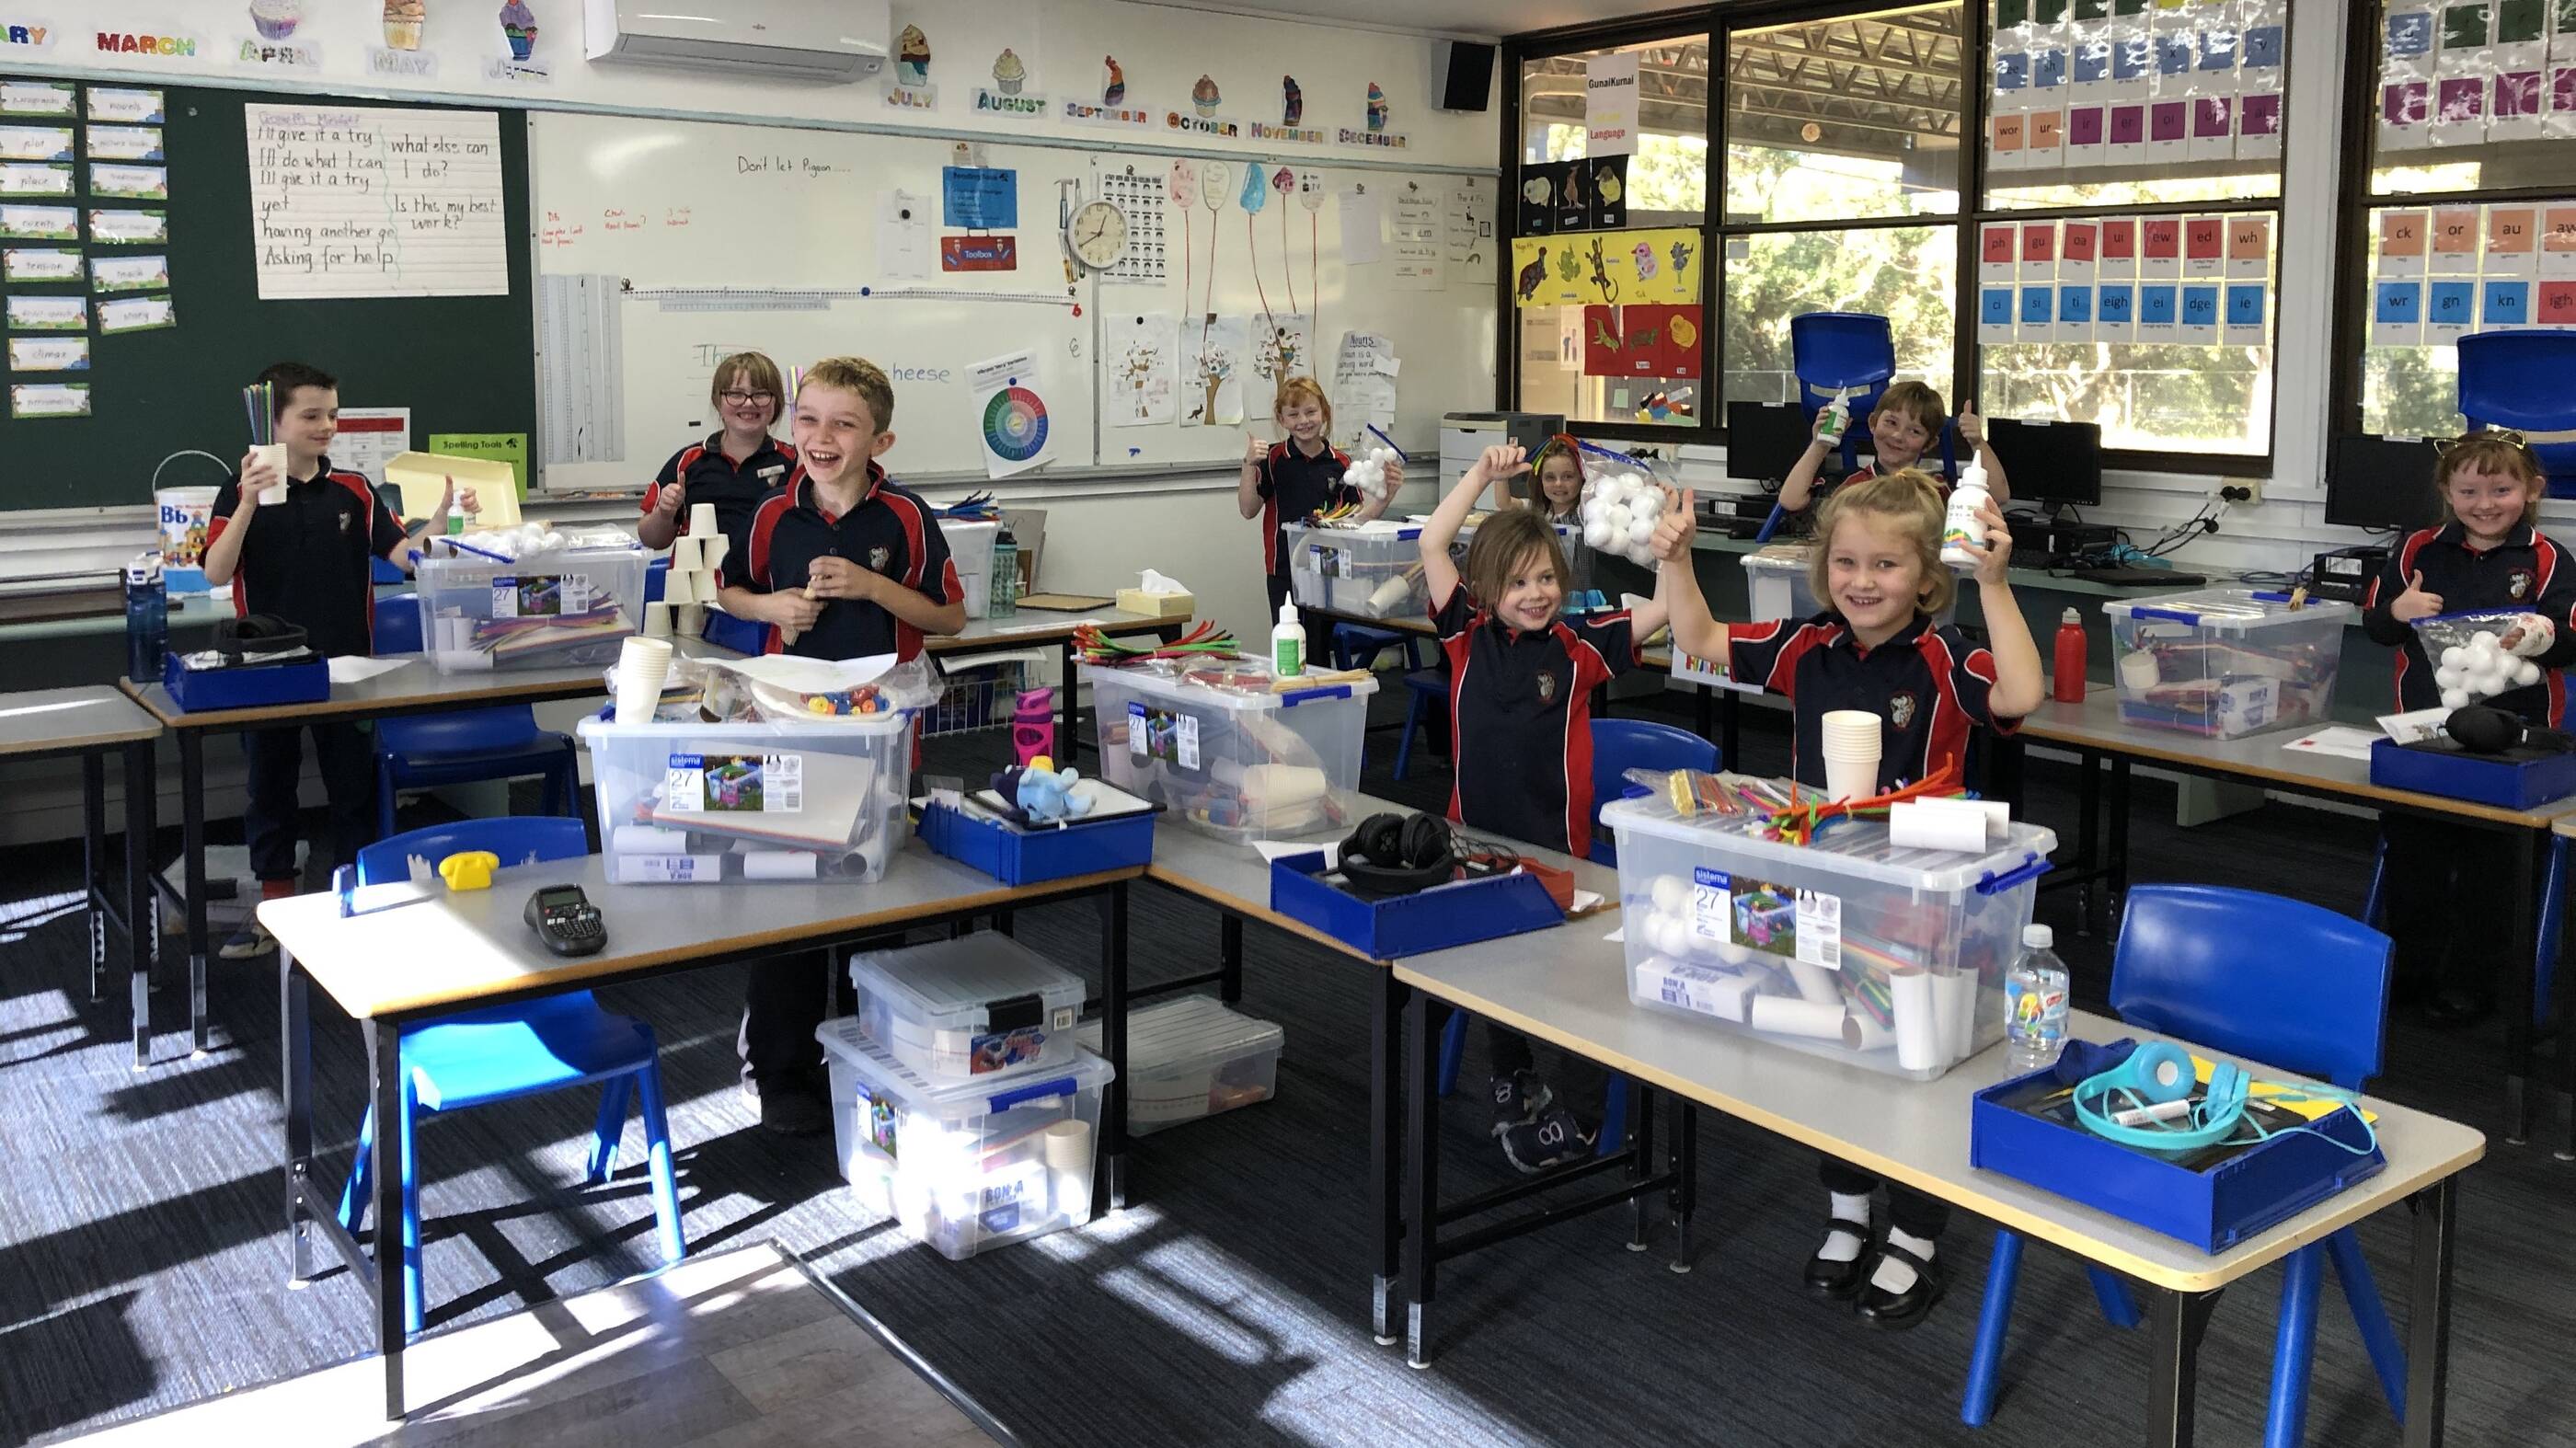 Image ExxonMobil supports both U.S. and international education initiatives.Students at Loch Sport Primary School in Australia enjoy their new STEM resources funded by an Esso Bright Future Grant.